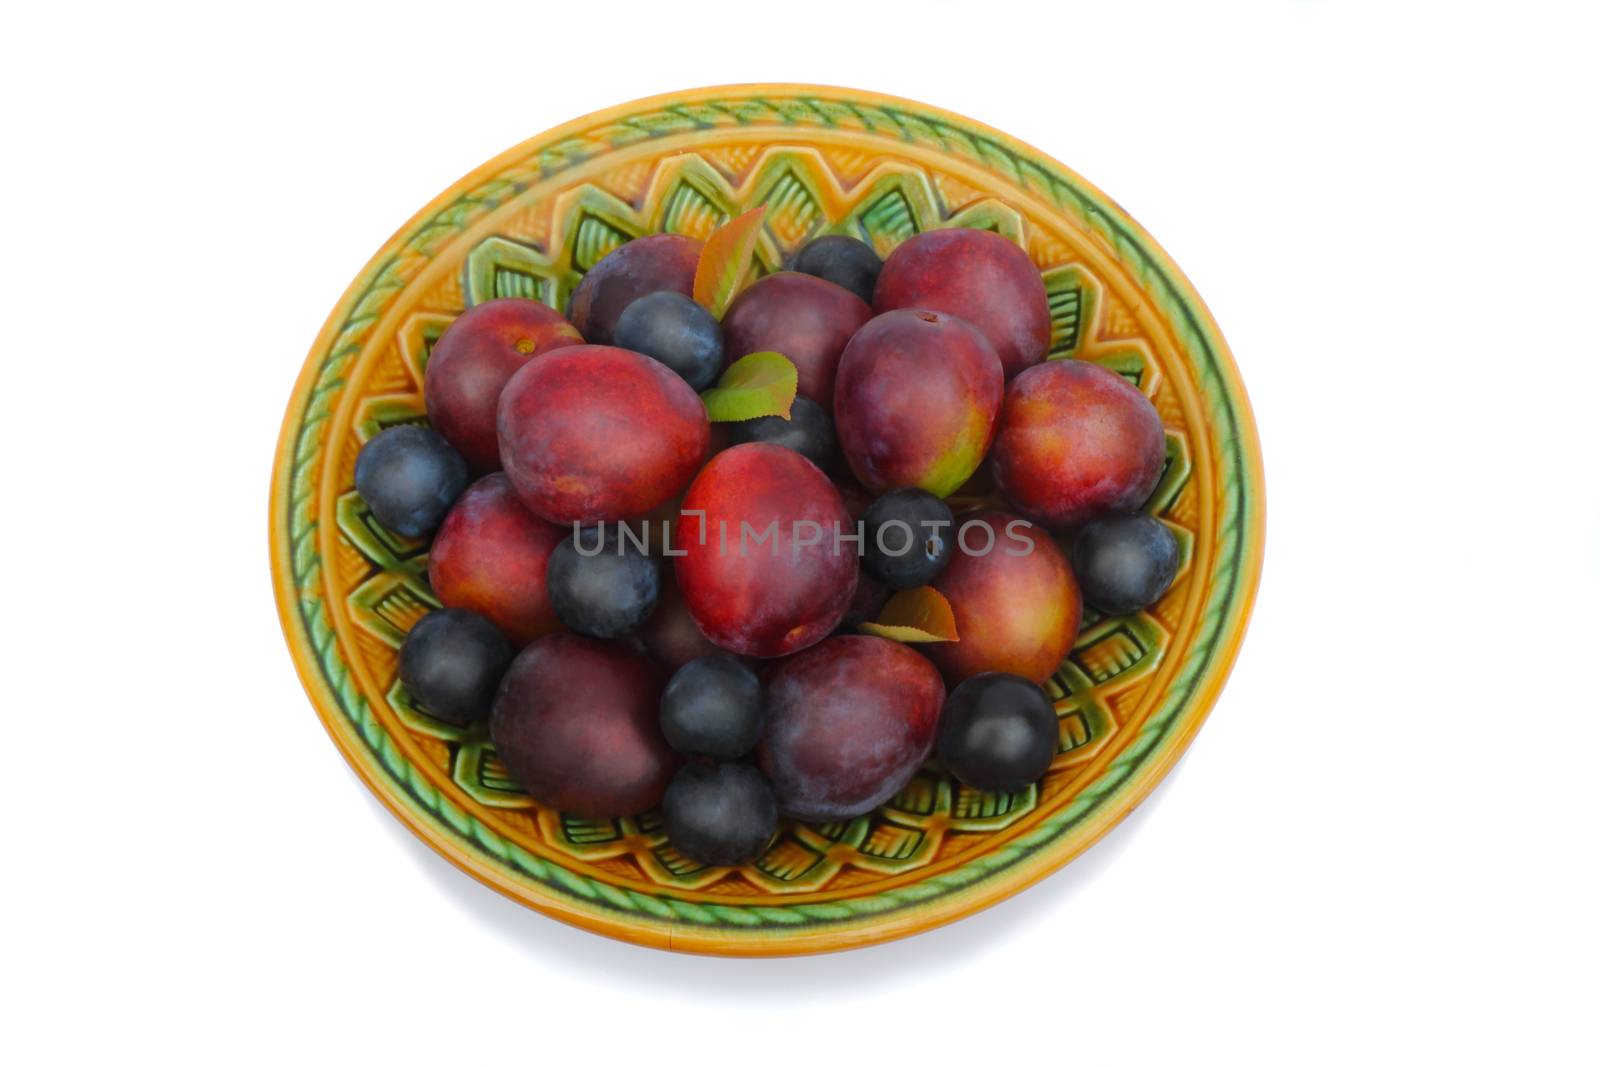 Ripe plums and prunes on ceramic dish on a white background. by georgina198